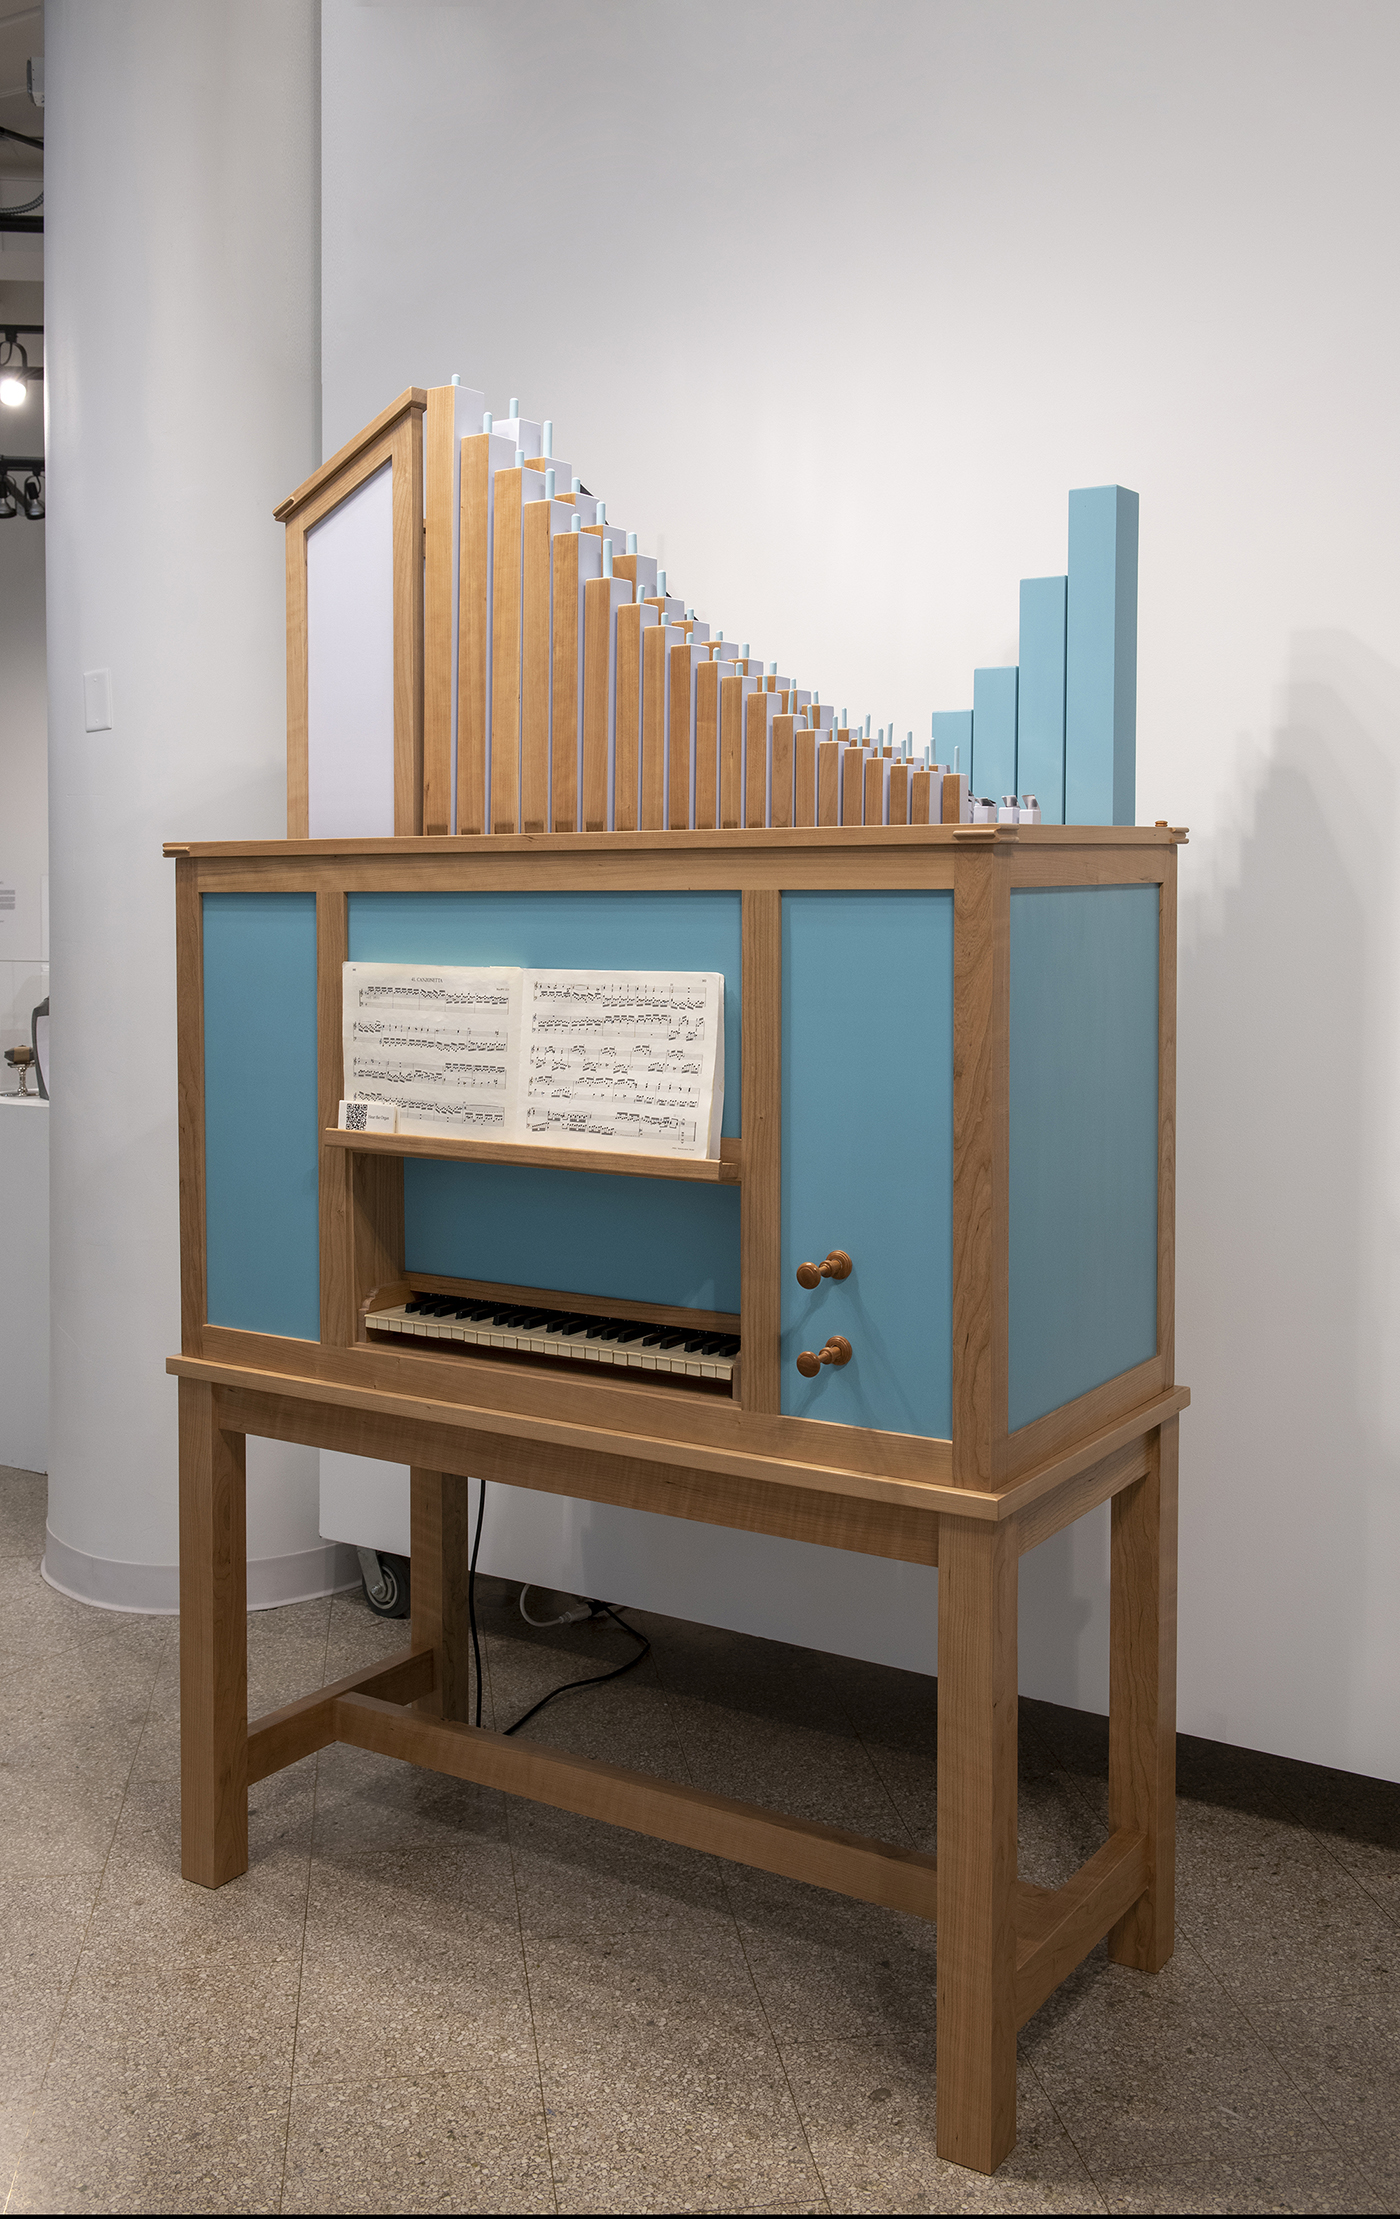 A handmade, wooden pipe organ in a gallery space.